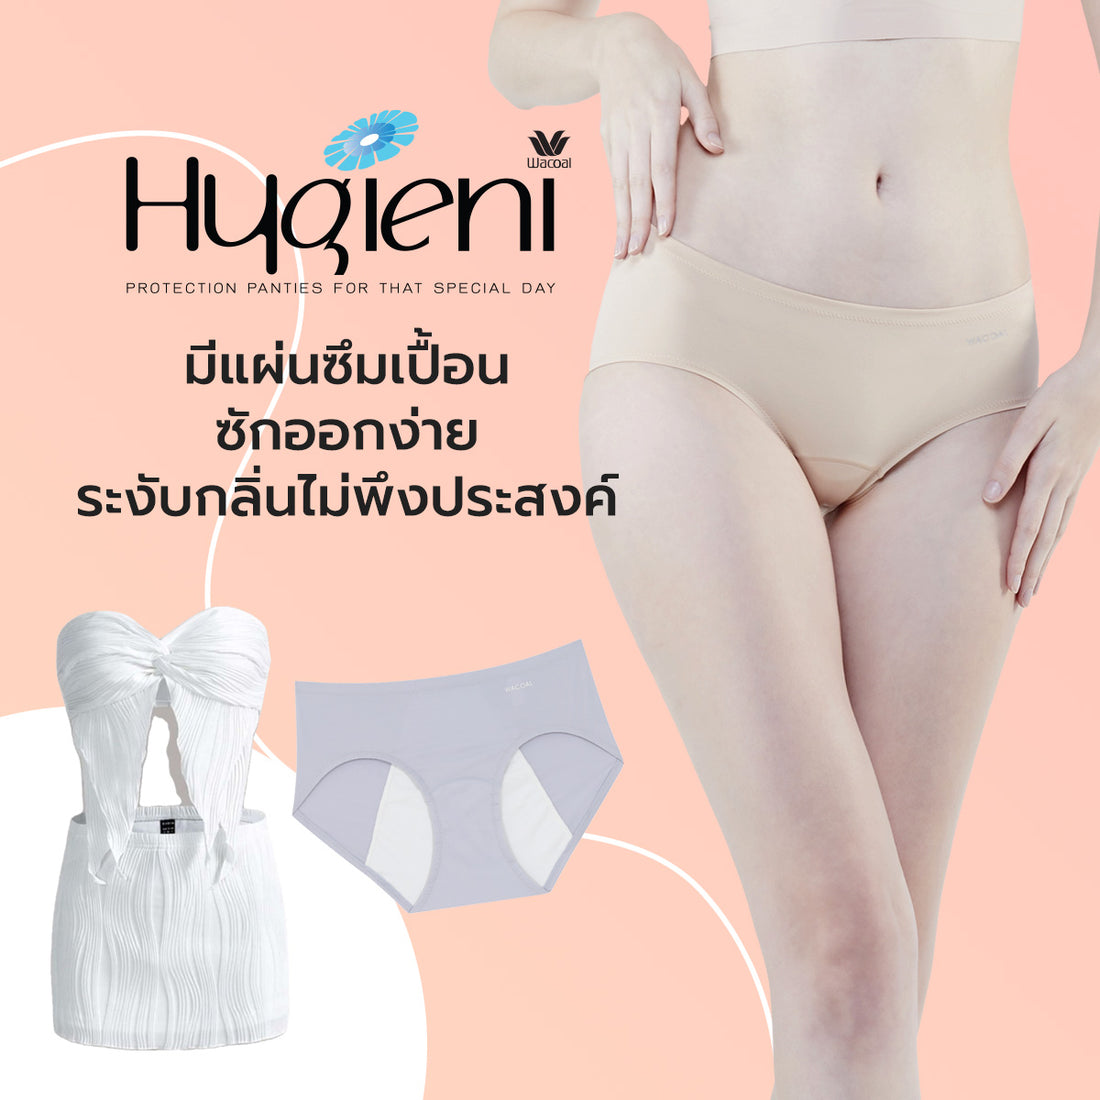 Wacoal Maternity Body Suit for postpartum mothers. Reinforced pattern, –  Thai Wacoal Public Company Limited